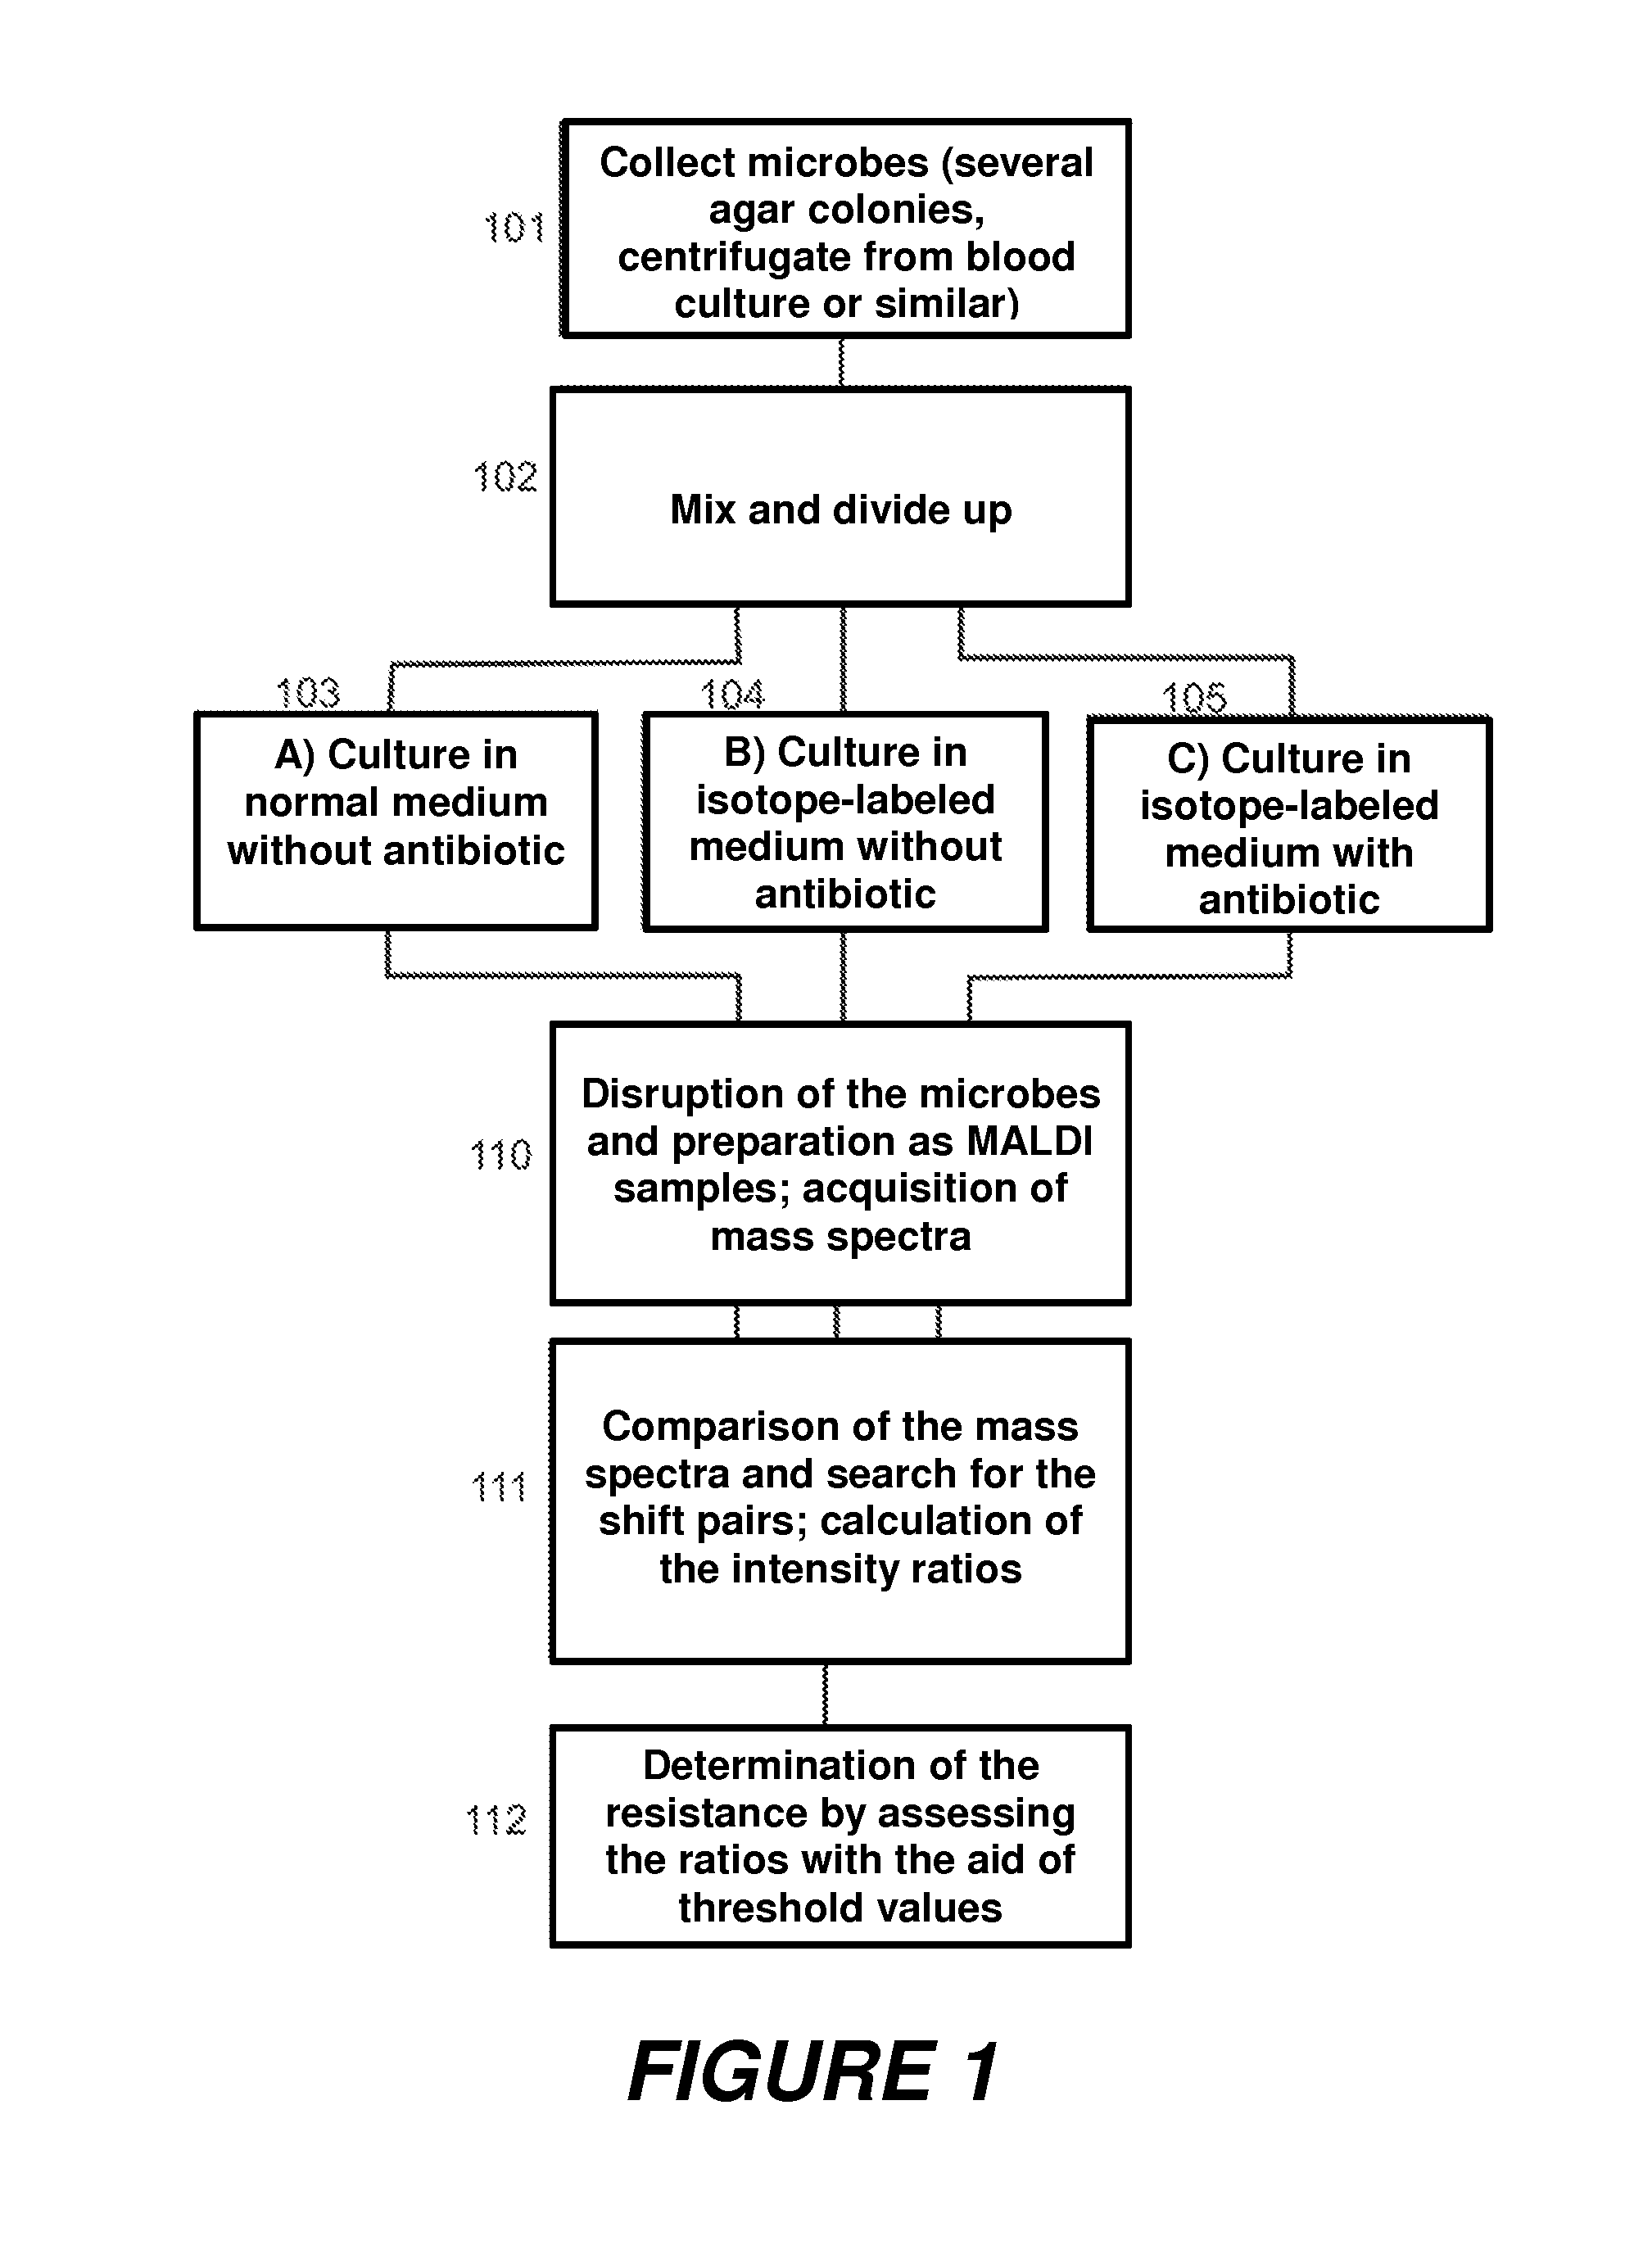 Mass spectrometric determination of microbial resistances